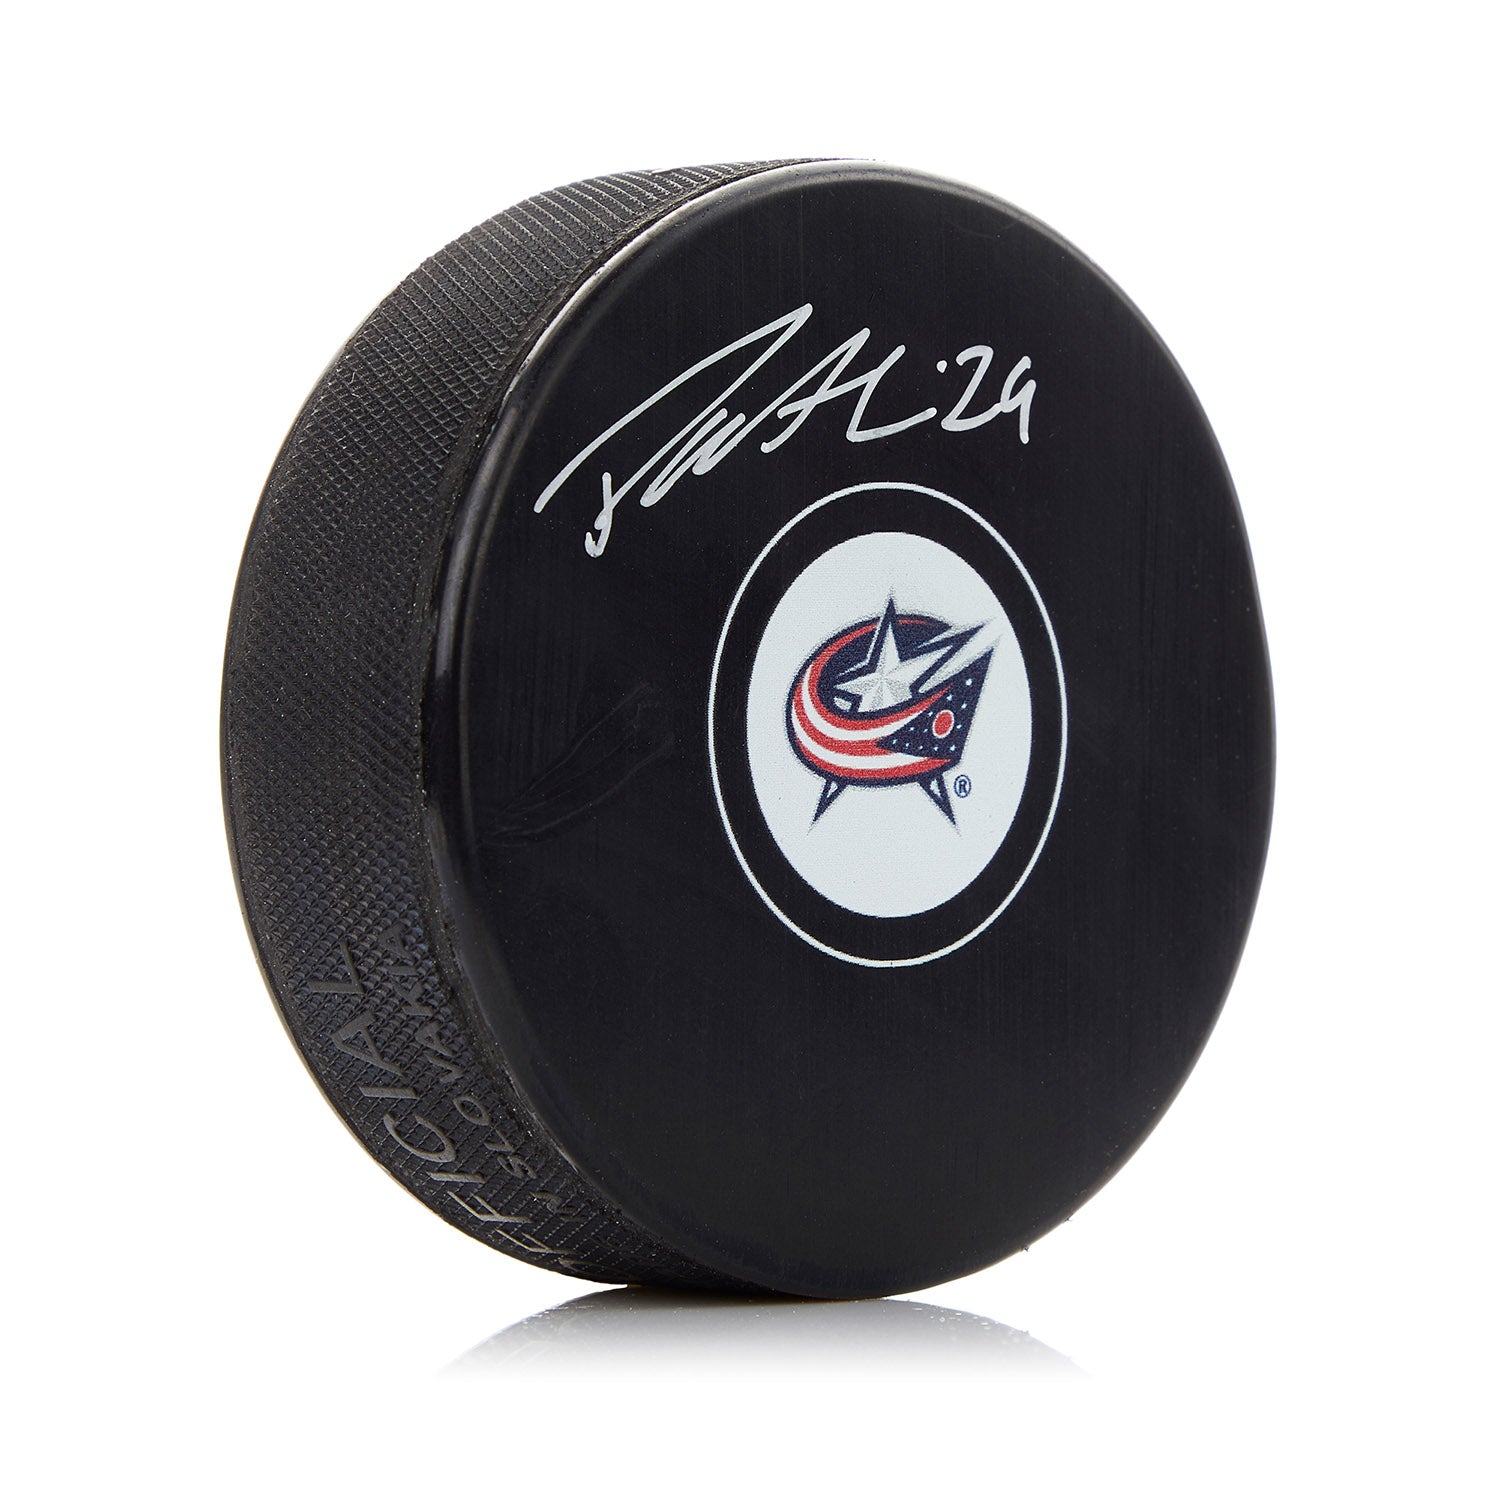 Columbus Blue Jackets 20th Anniversary Official Game Model Puck